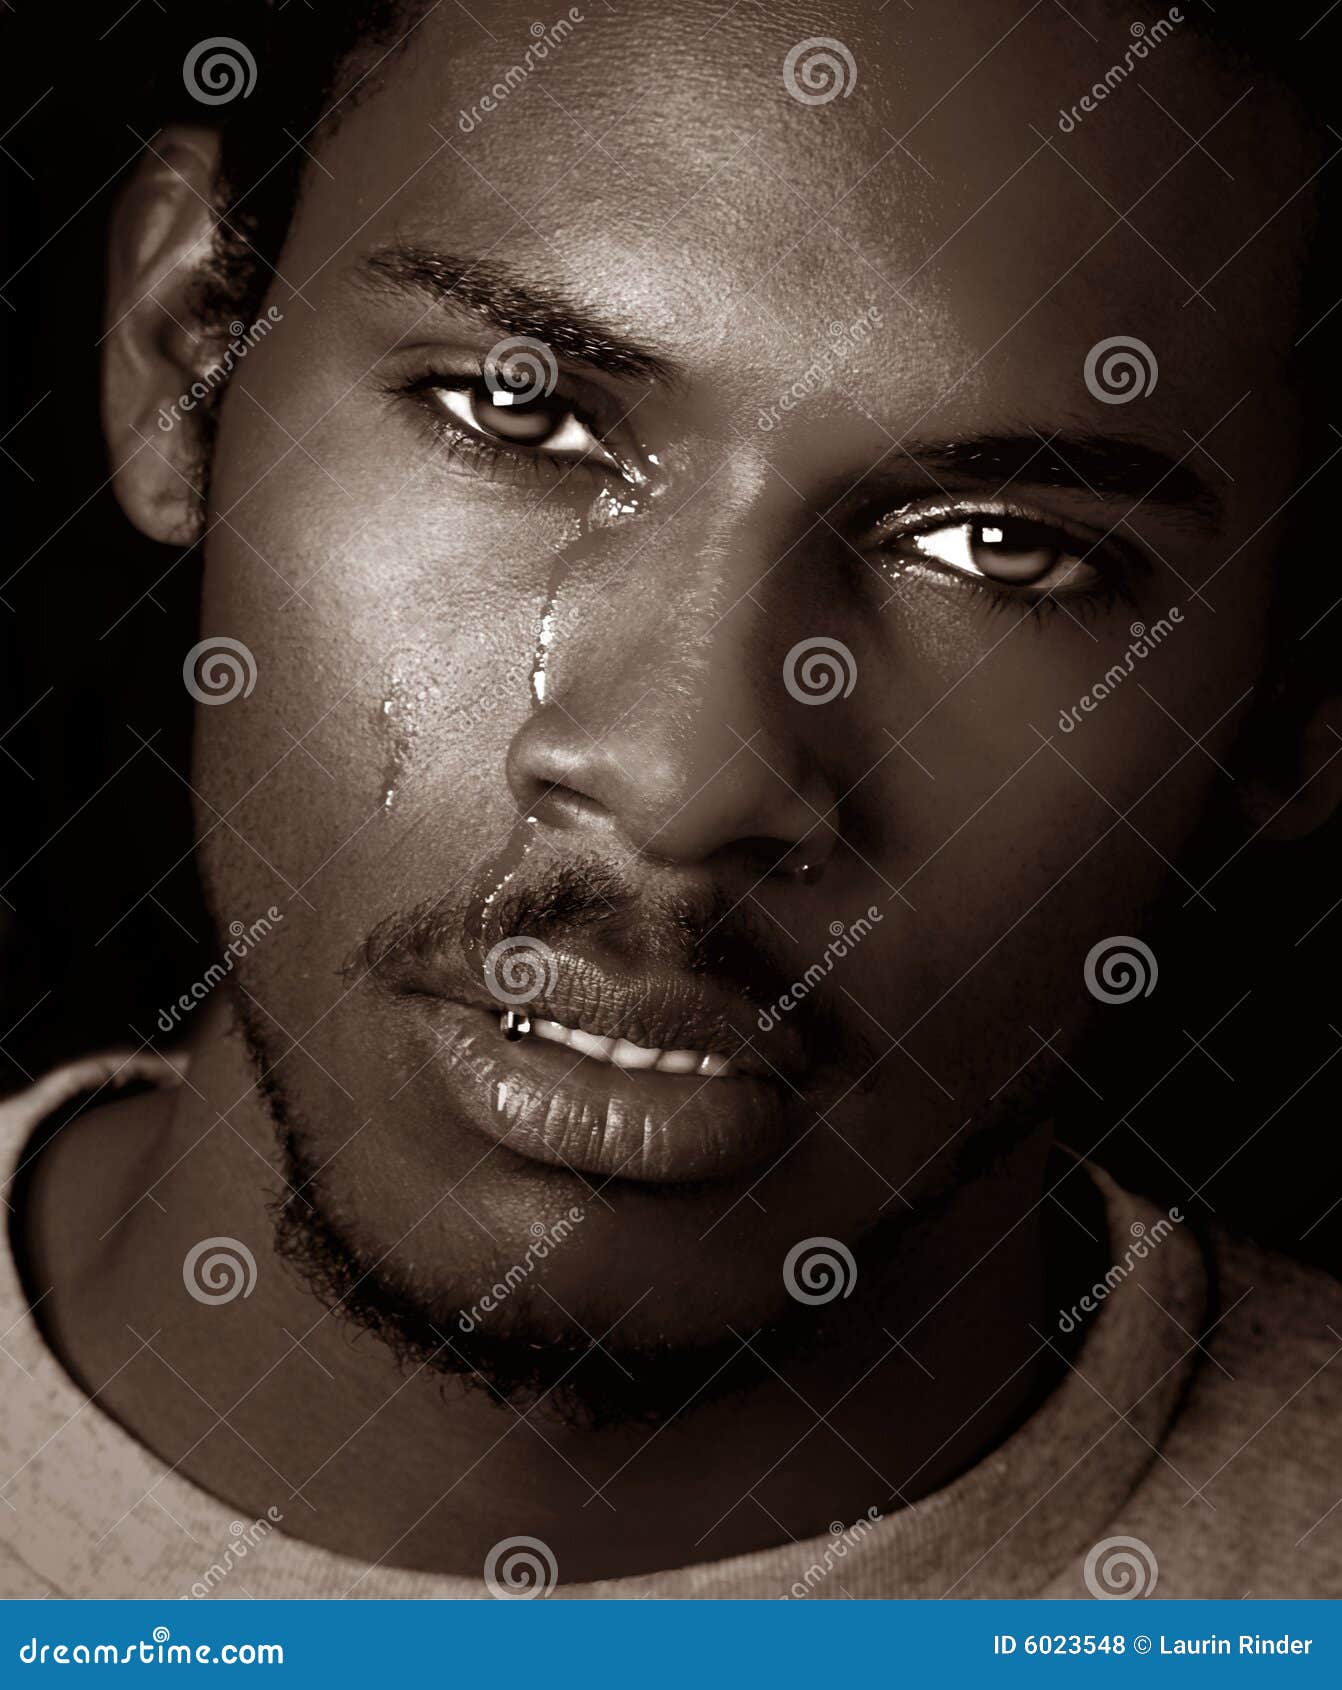 African Boy Crying Stock Photos & African Boy Crying Stock 